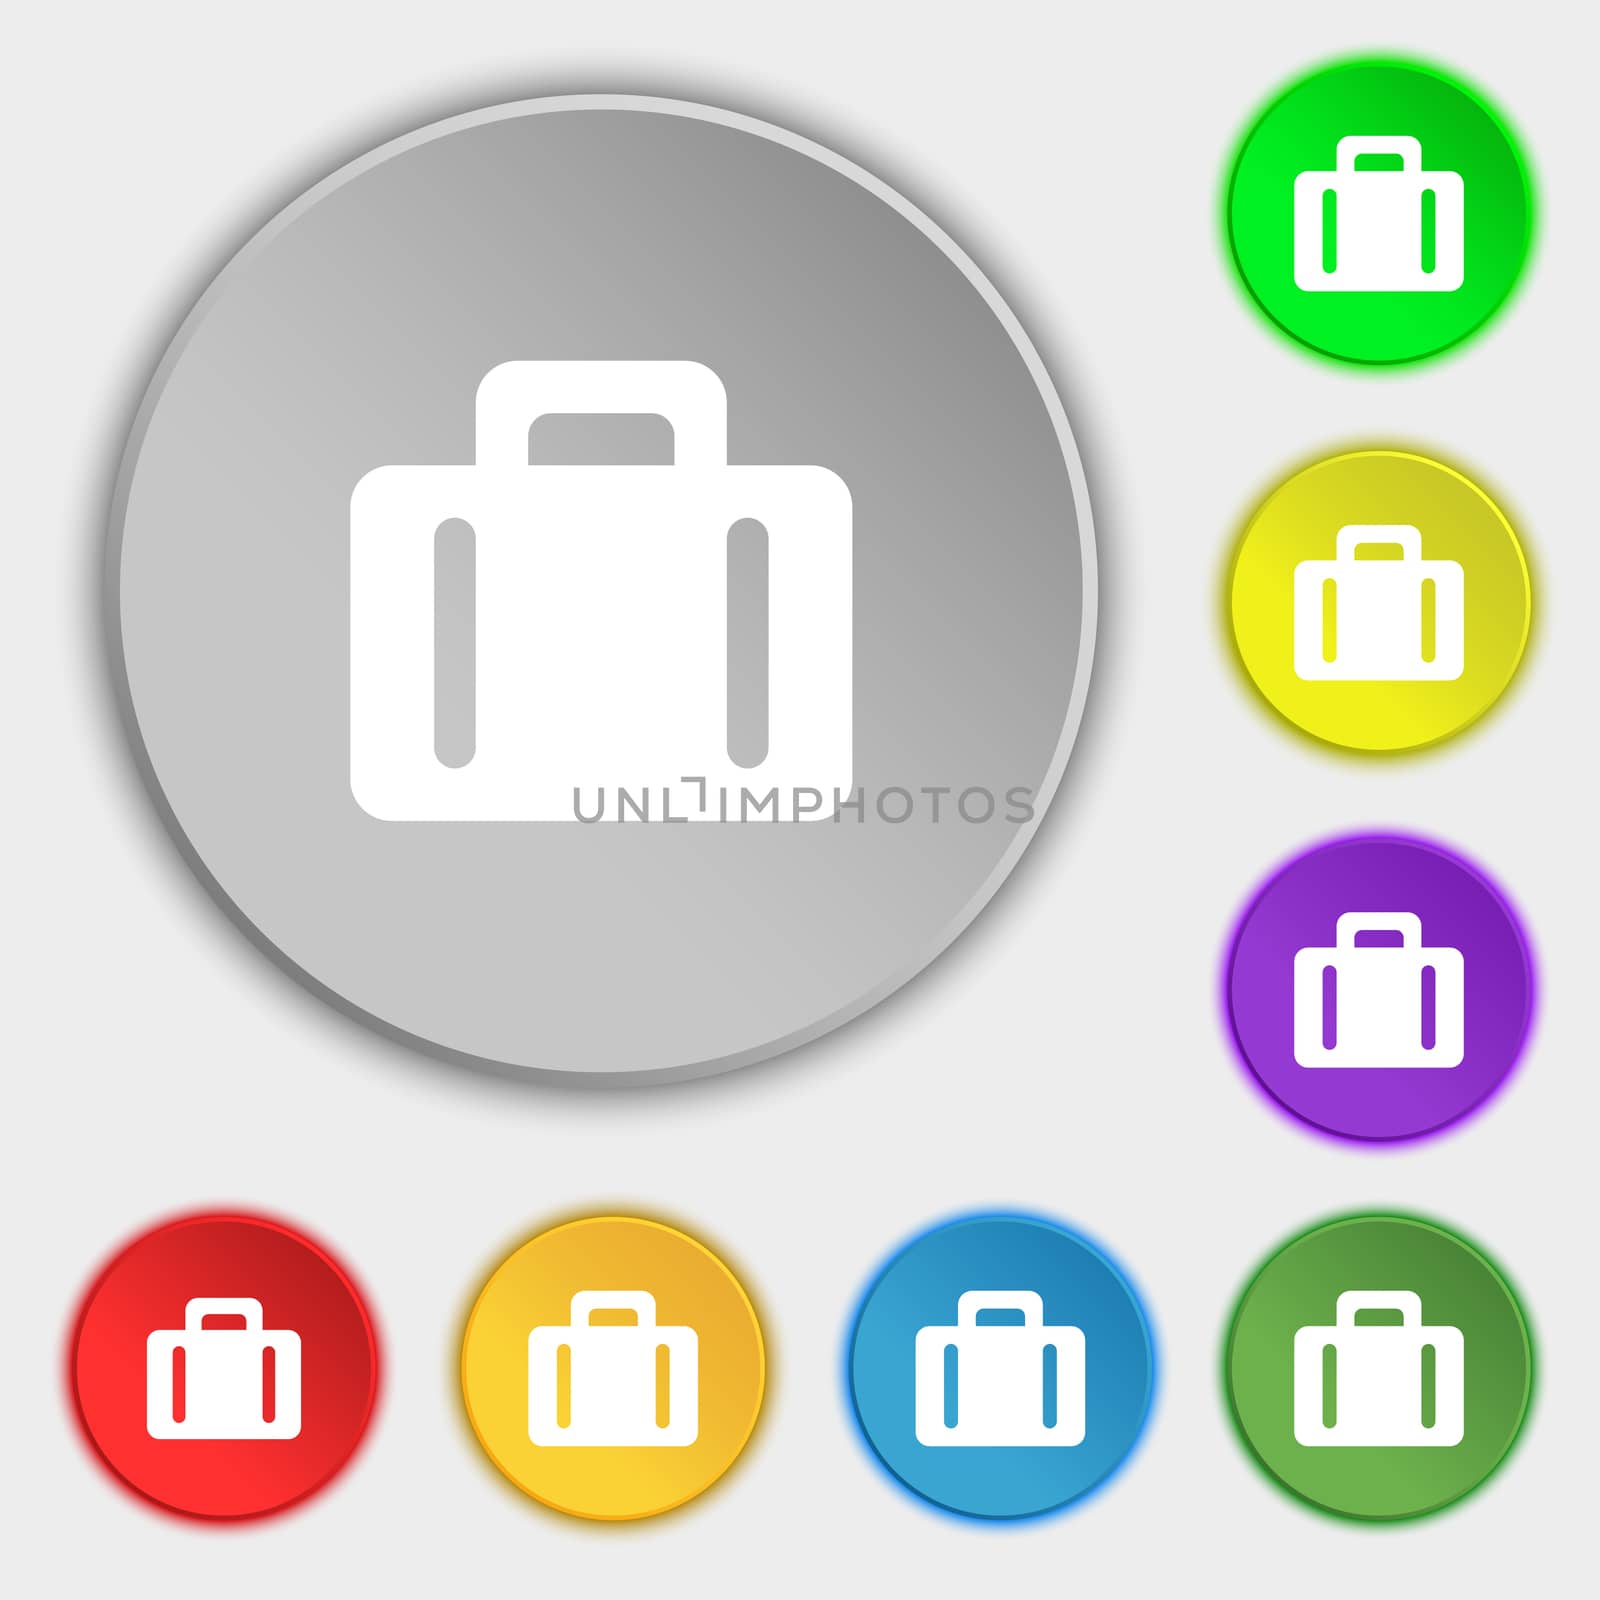 suitcase icon sign. Symbol on five flat buttons. illustration